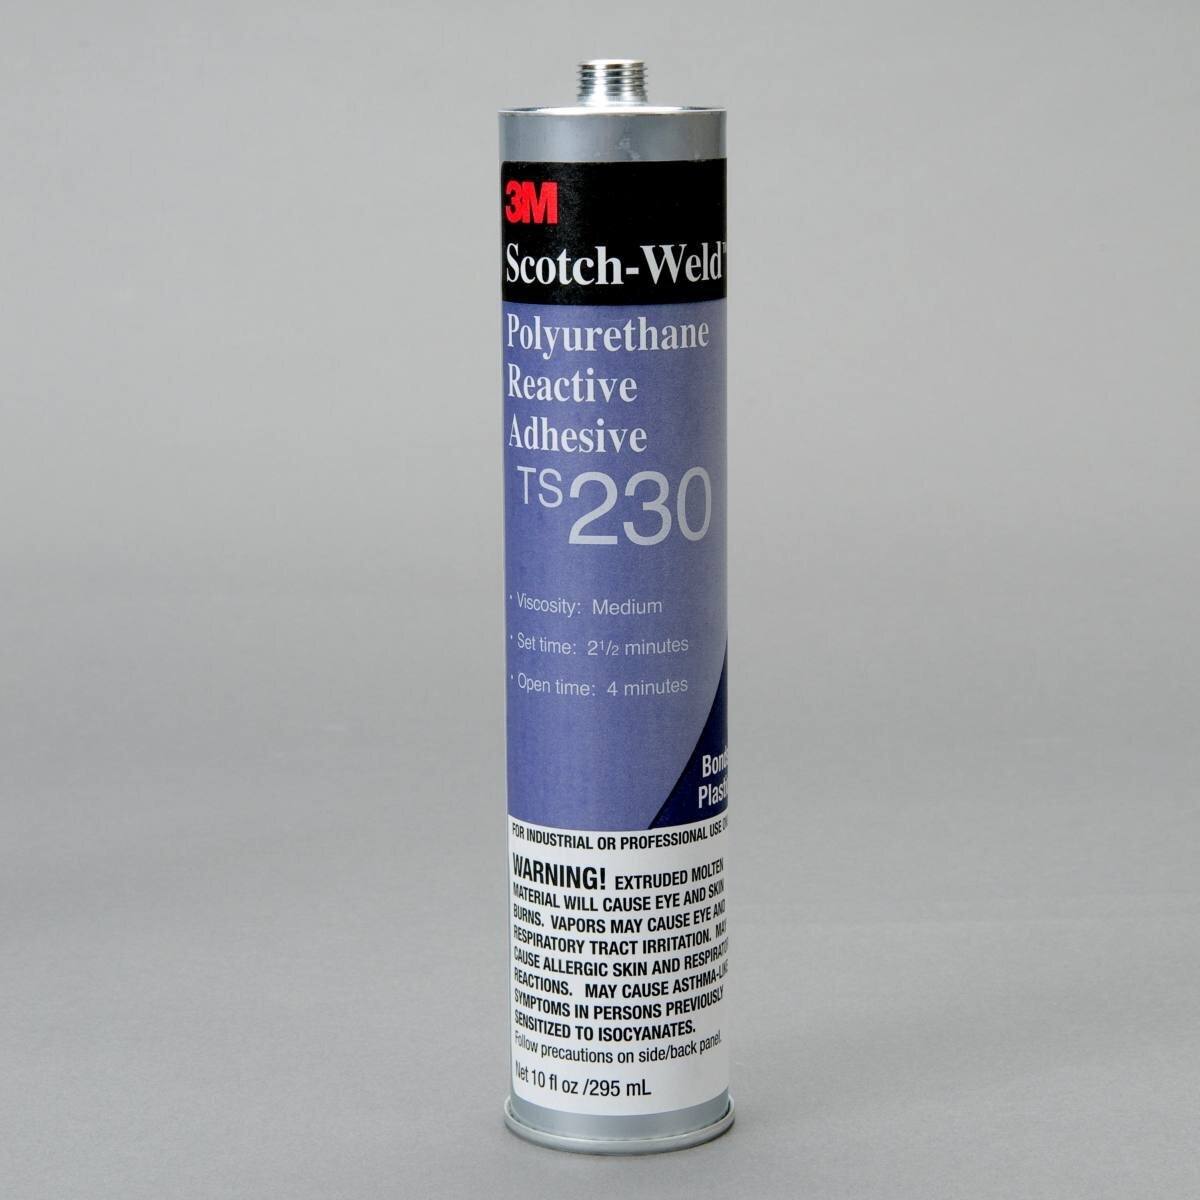 3M Scotch-Weld Colle thermofusible polyuréthane réactive TS 230, blanche, 2 kg